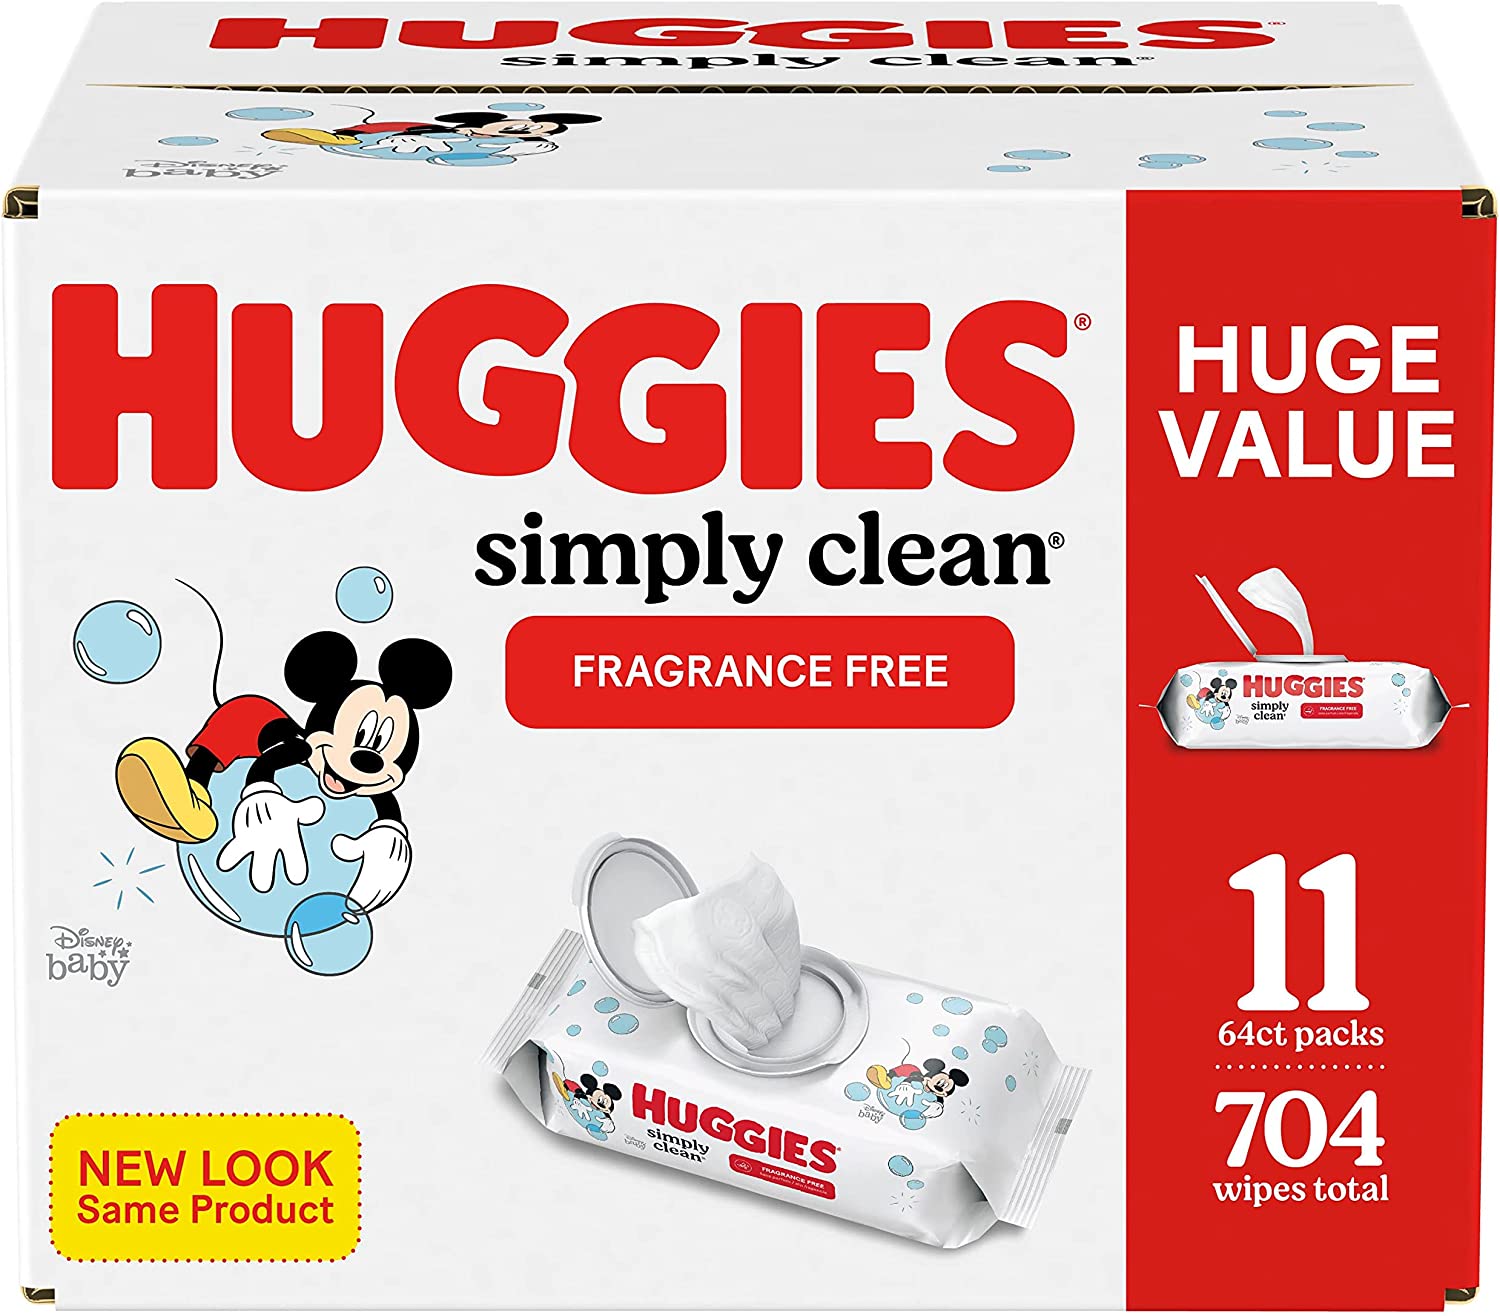 704-Count Huggies Simply Clean Baby Wipes (Unscented) $11.95 w/ S&S + Free Shipping w/ Prime or on orders over $25